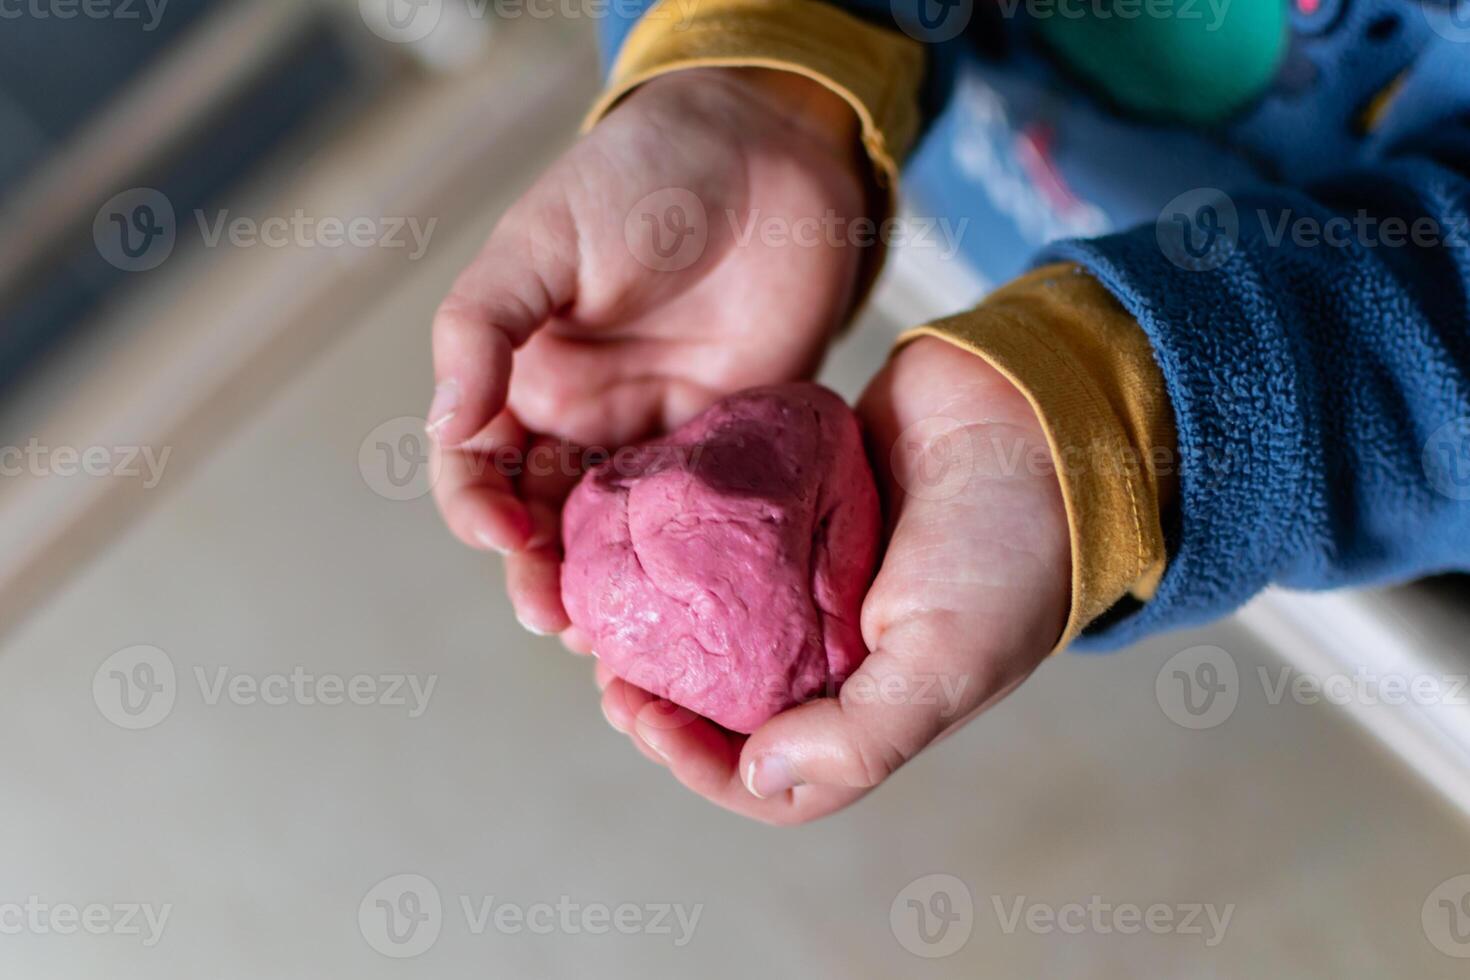 Child having fun modeling salt dough, authentic activity with natural pink coloring beet juice, fine motor skills development photo